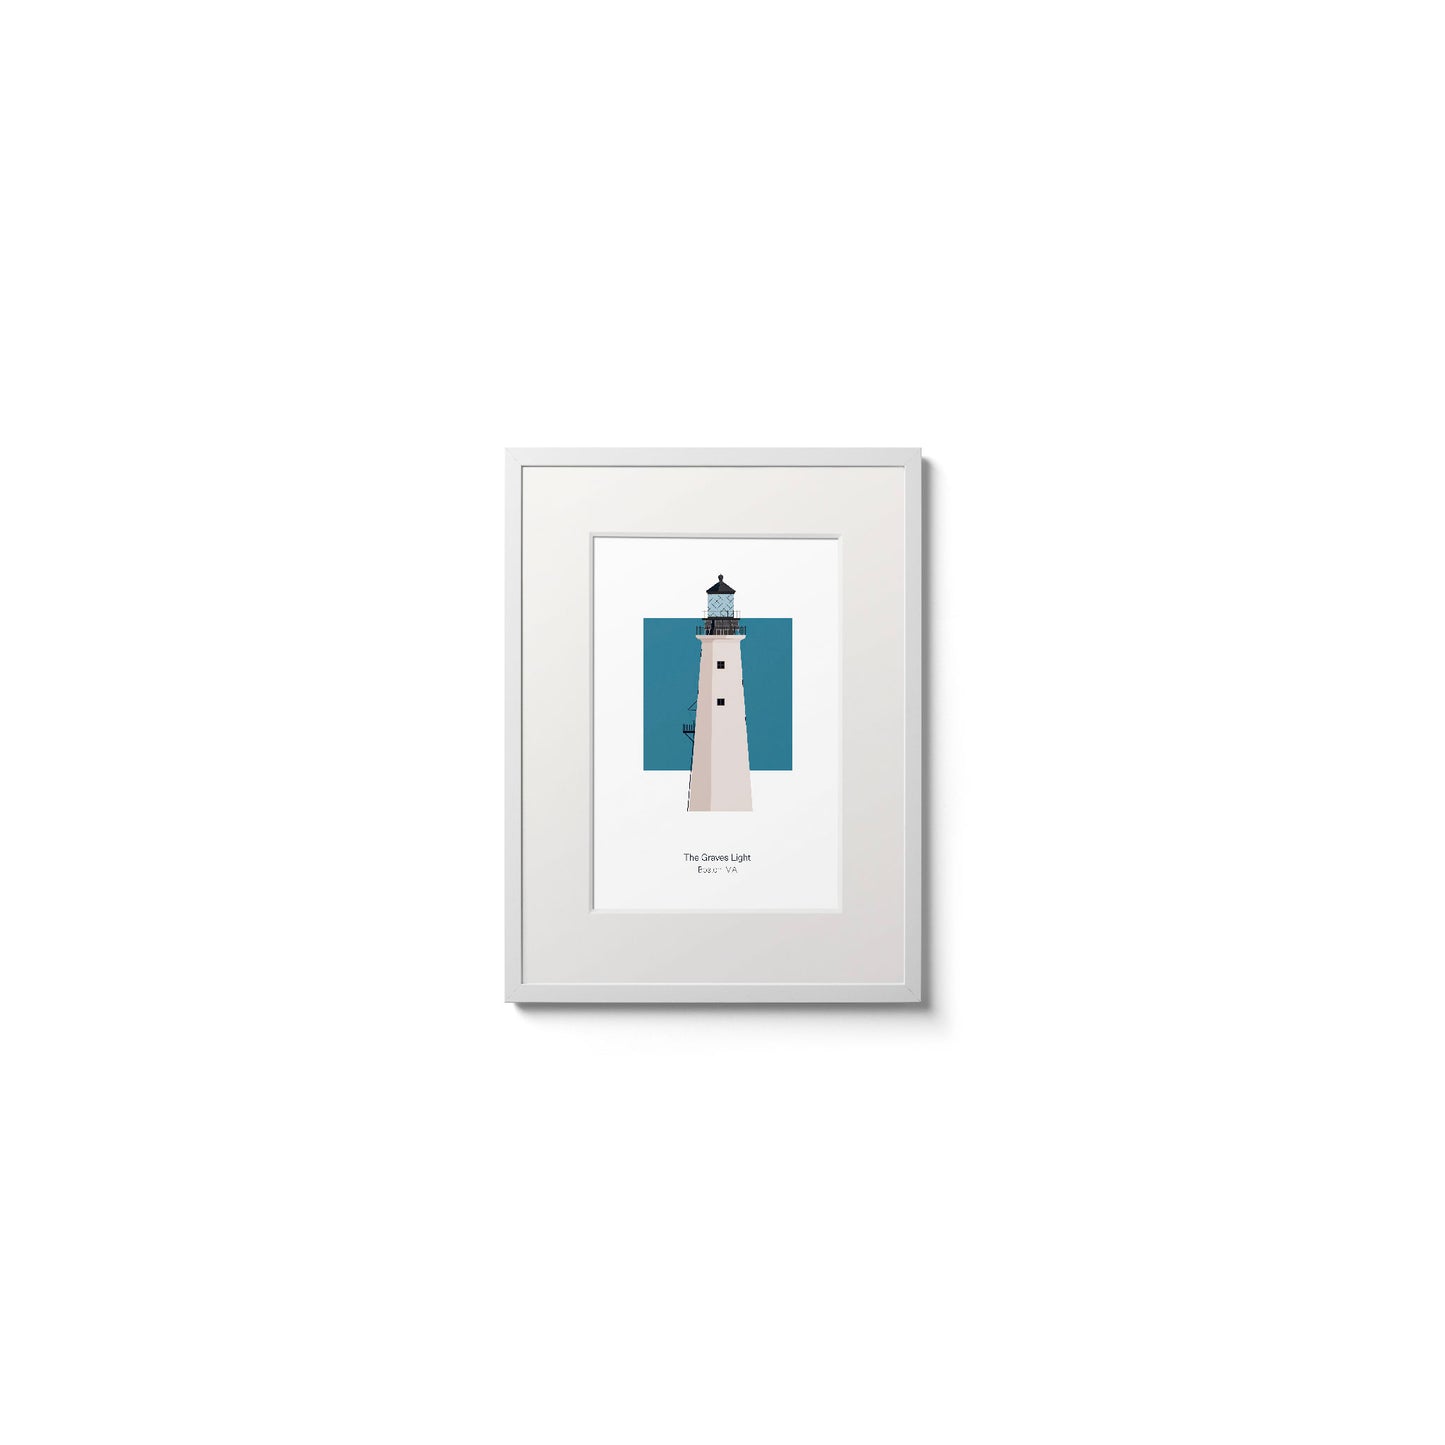 Illustration of the The Graves lighthouse, MA, USA. On a white background with aqua blue square as a backdrop., in a white frame  and measuring 6"x8" (15x20cm).